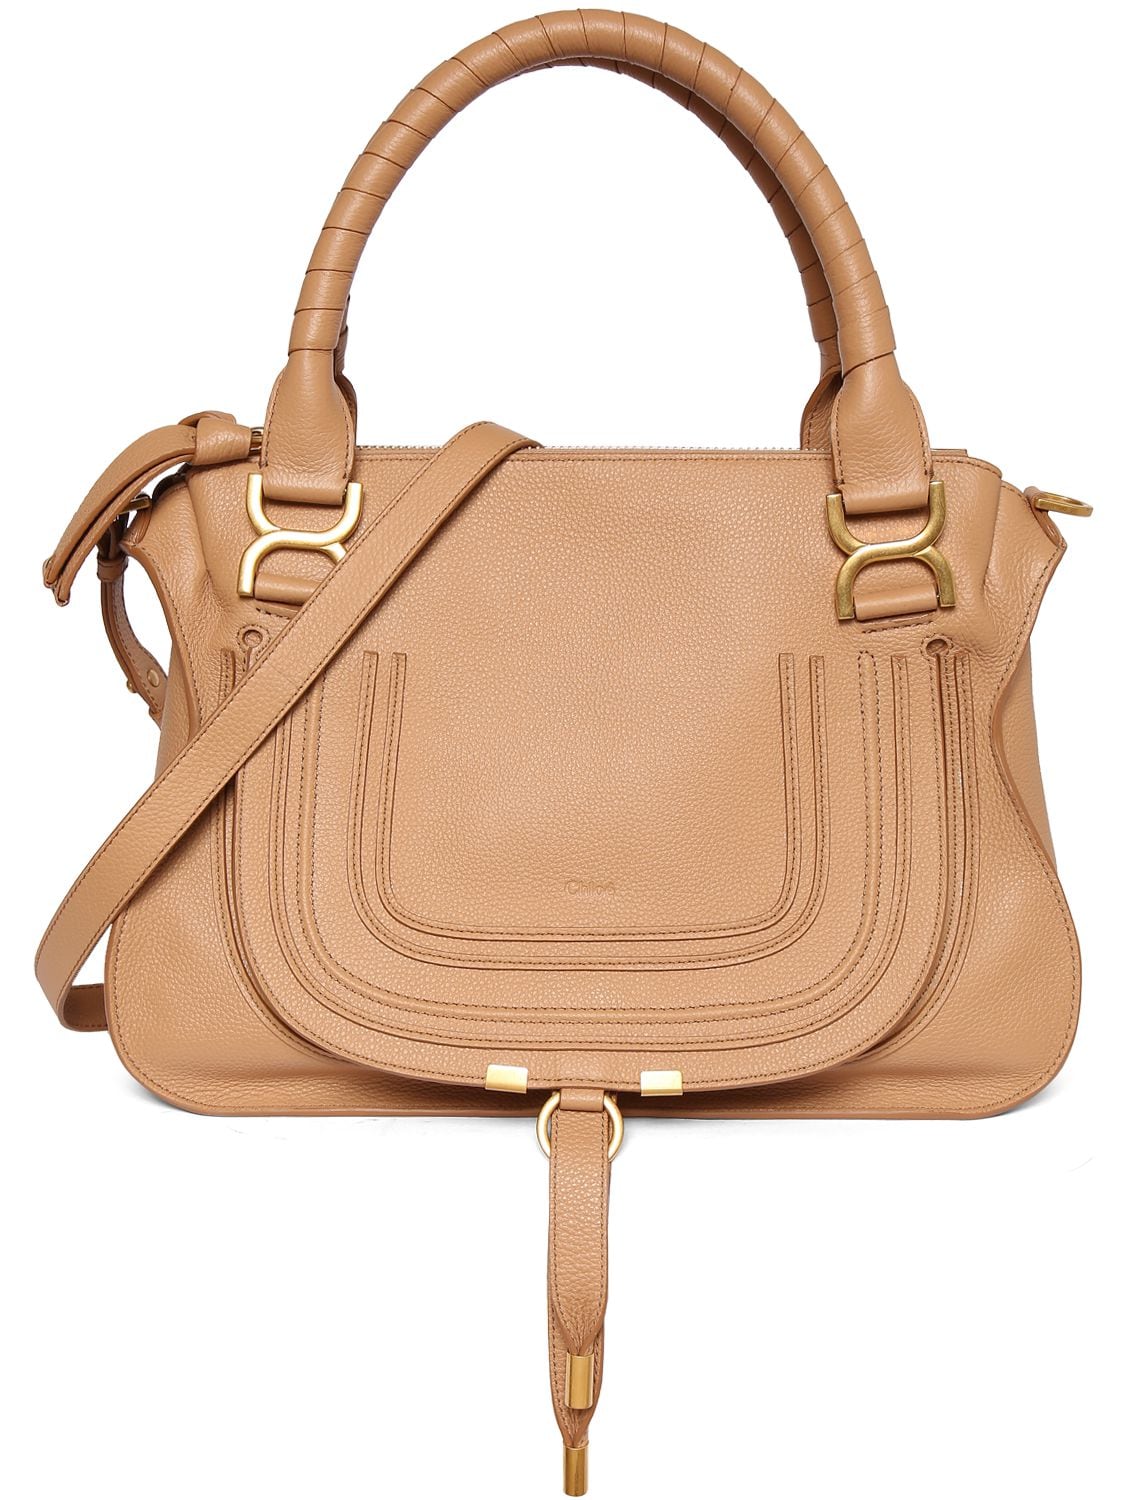 Chloé Small Marcie Leather Shoulder Bag In Light Tan